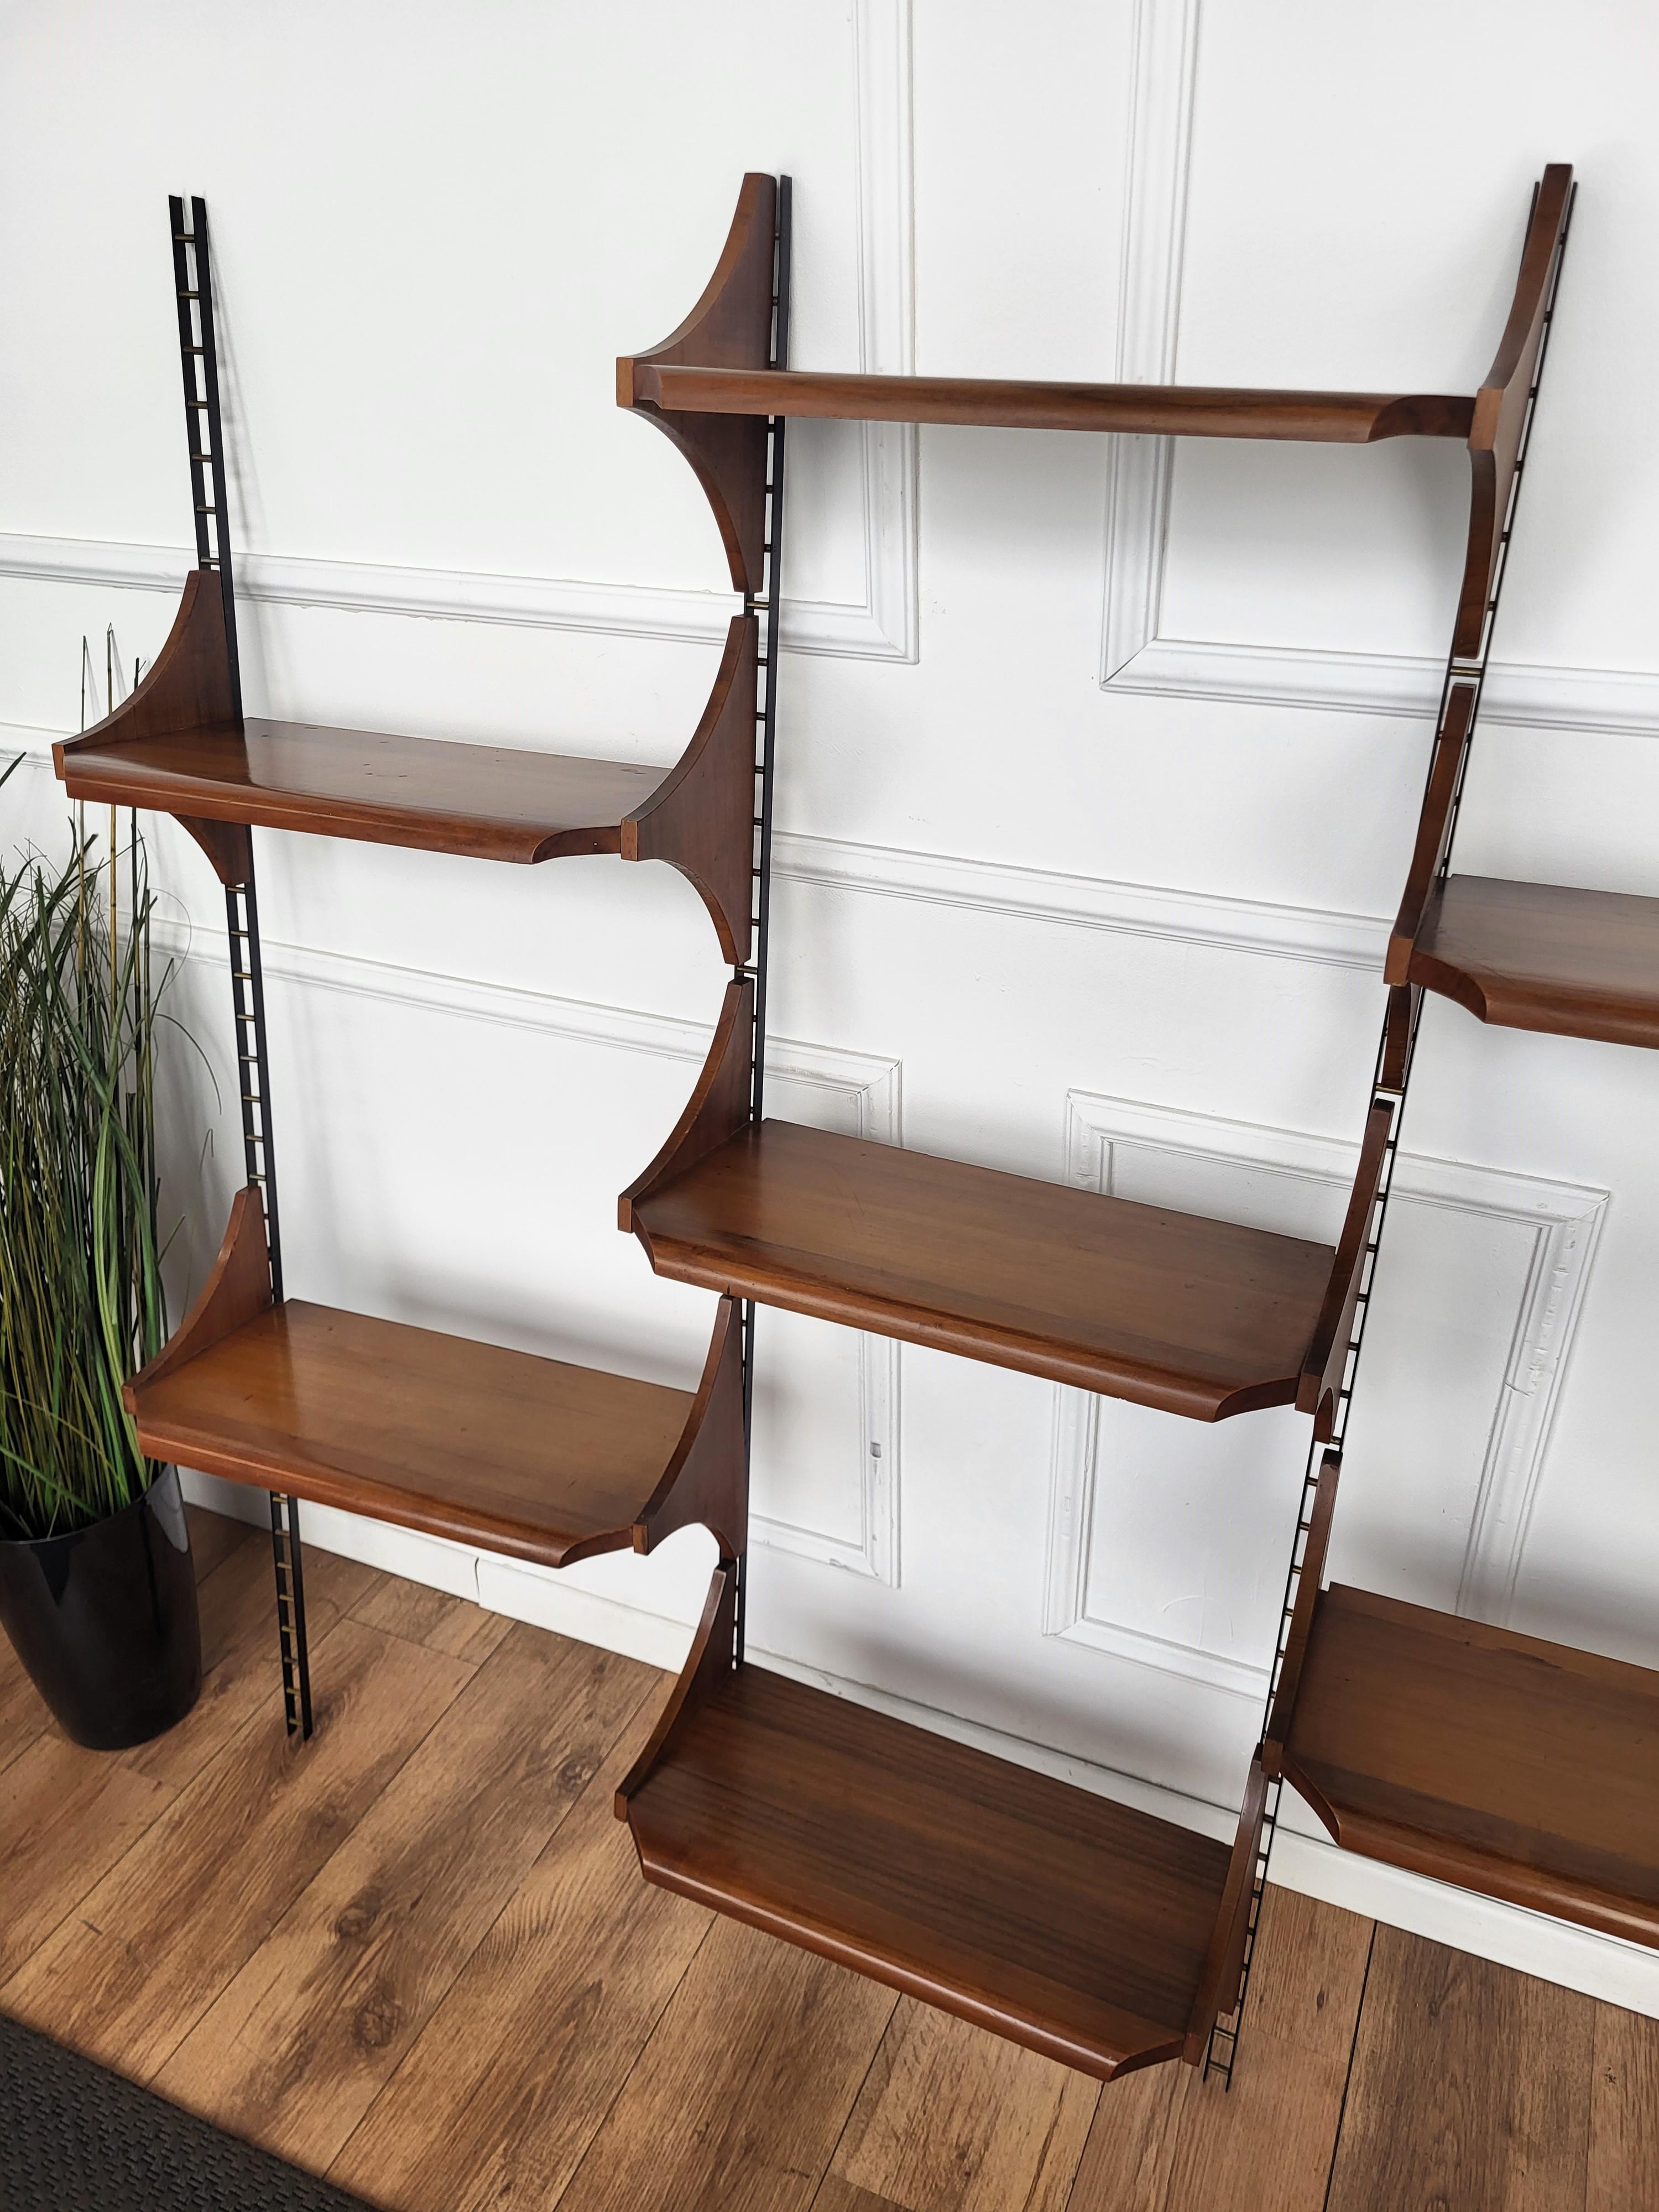 Mid-Century Modern 1950s Italian Wood Metal Modular Wall Shelving System Bookcase 10 Shelves For Sale